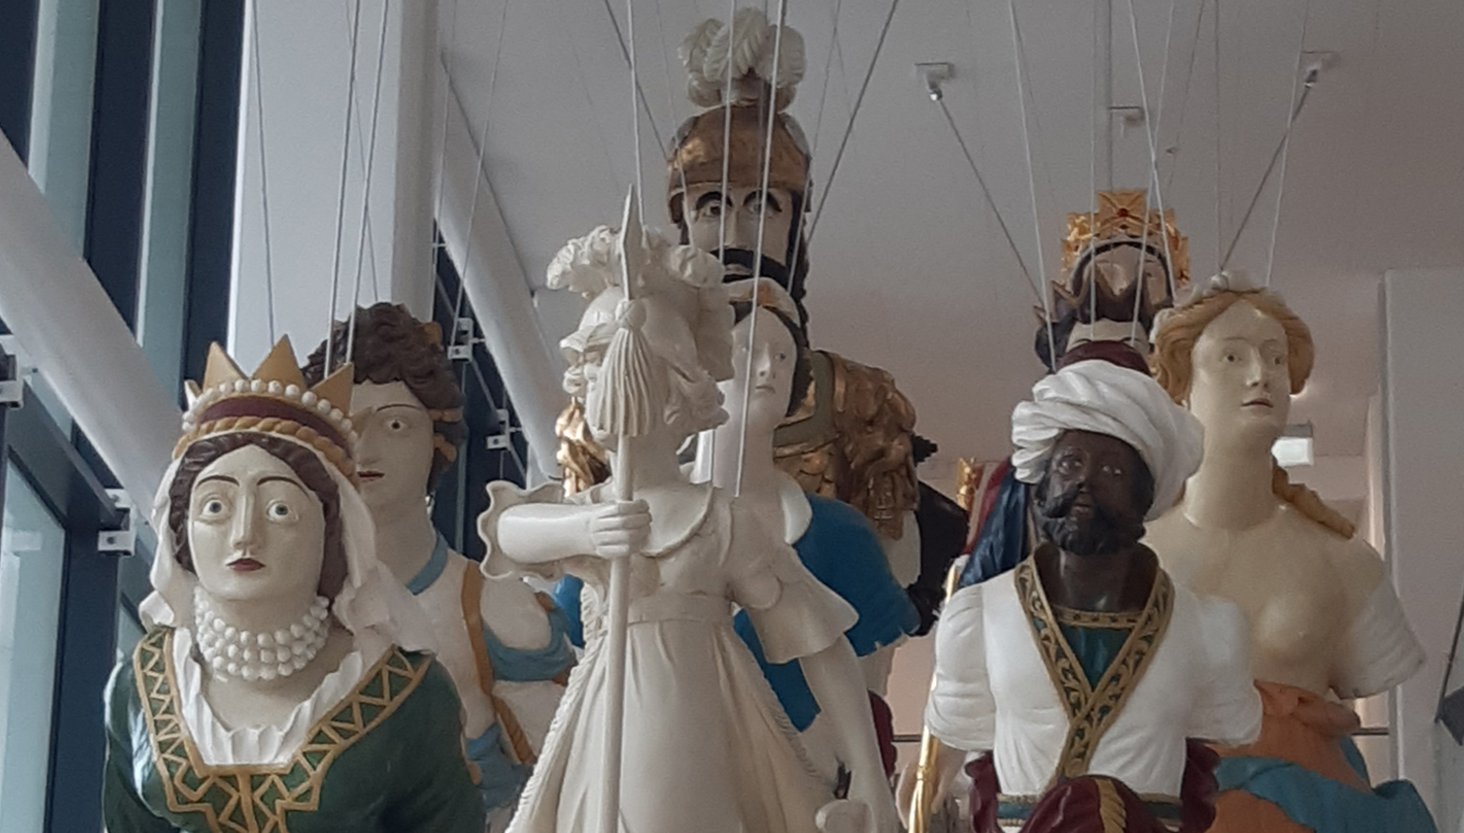 Group of historic ship's figureheads suspended from a ceiling